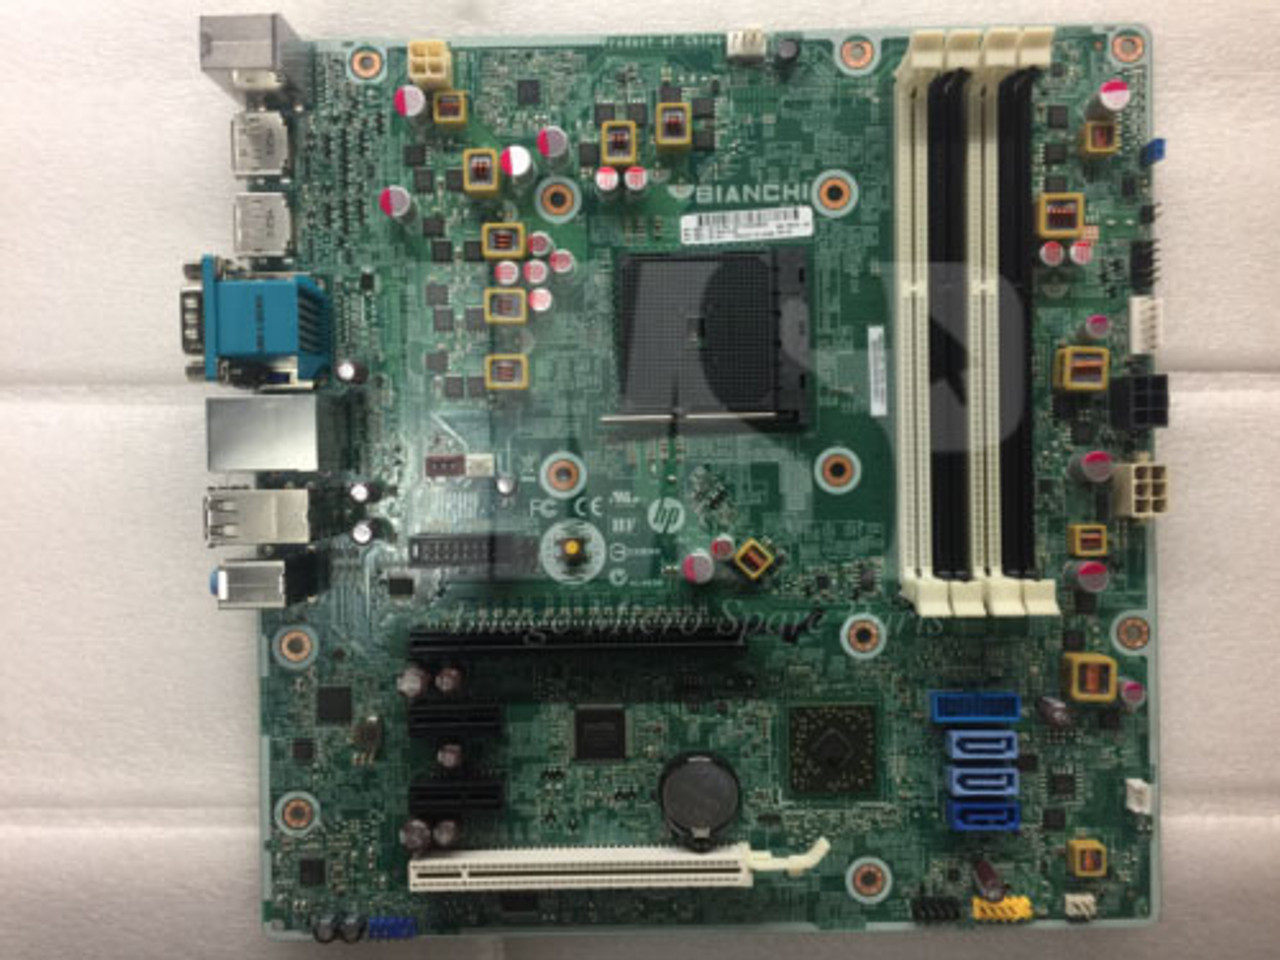 Replace the System Board, HP 350 G2 Notebook PC